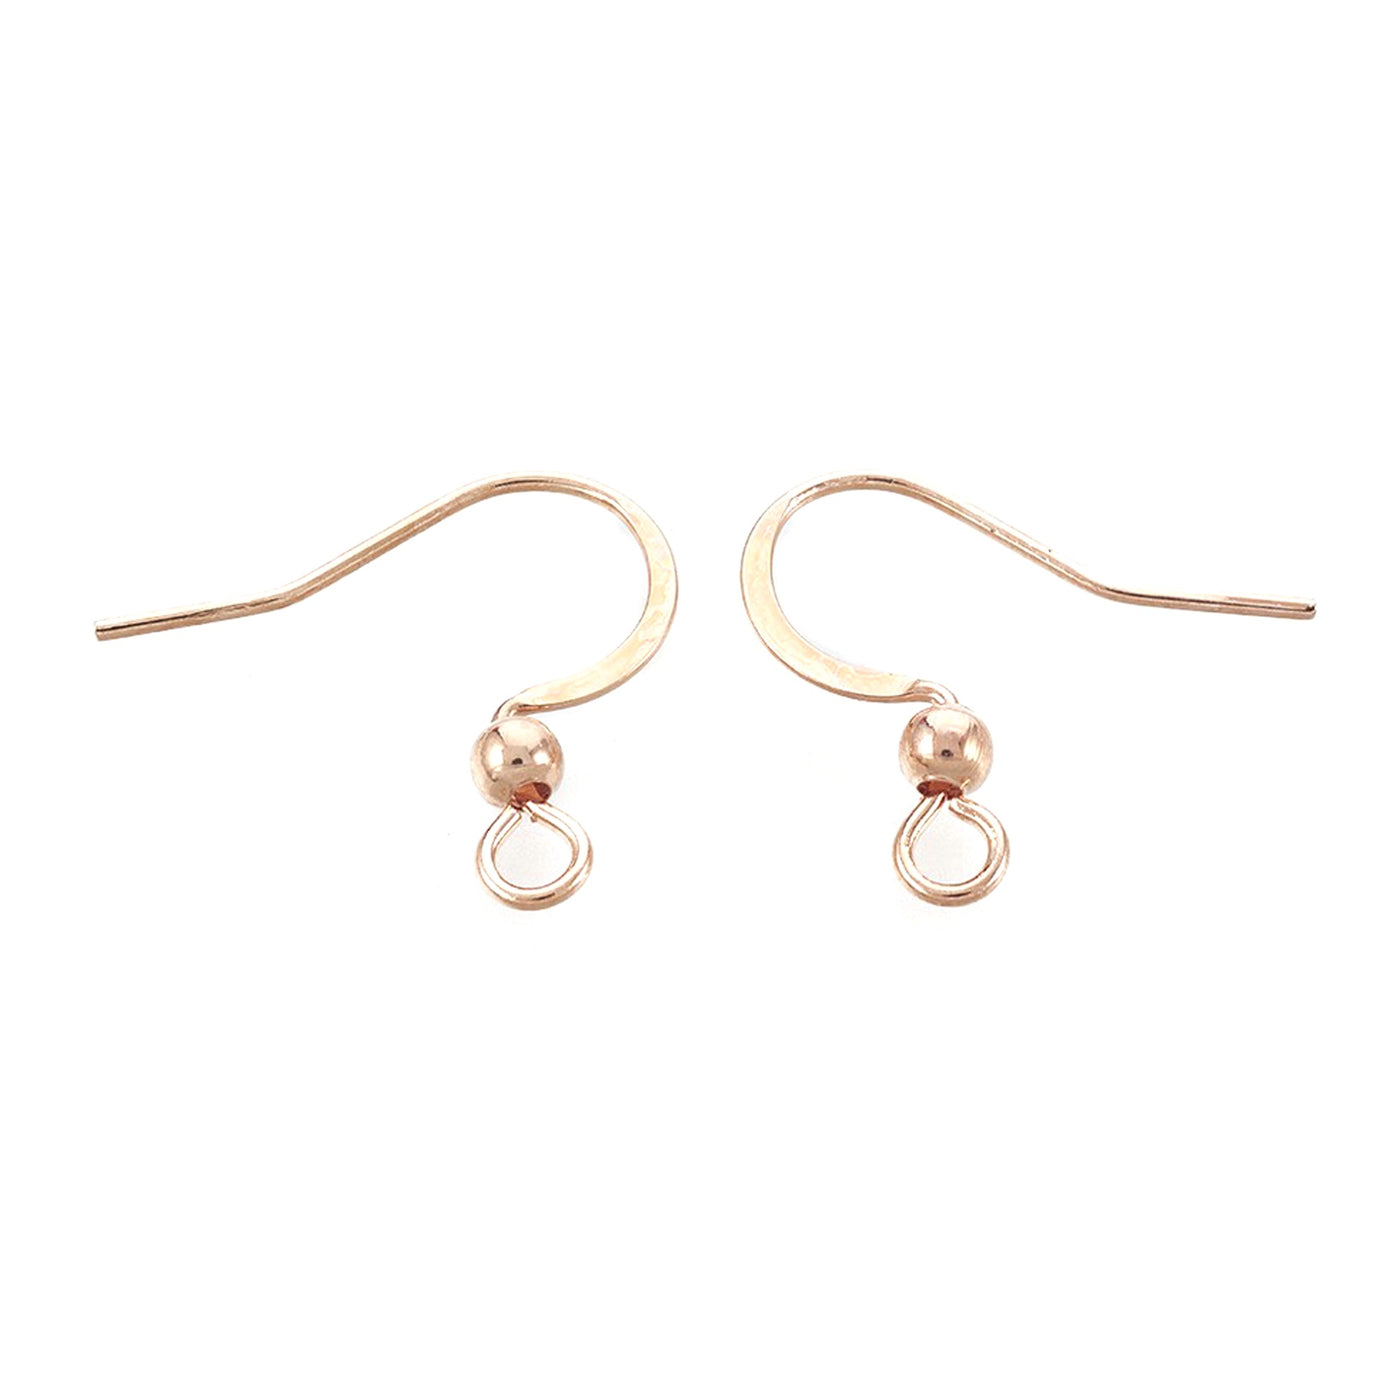 100 Pairs Rose Gold Color Earwires French Earring Hooks/Dangle Earring  Findings Jewelry Making DIY (EH-1007-RG1)